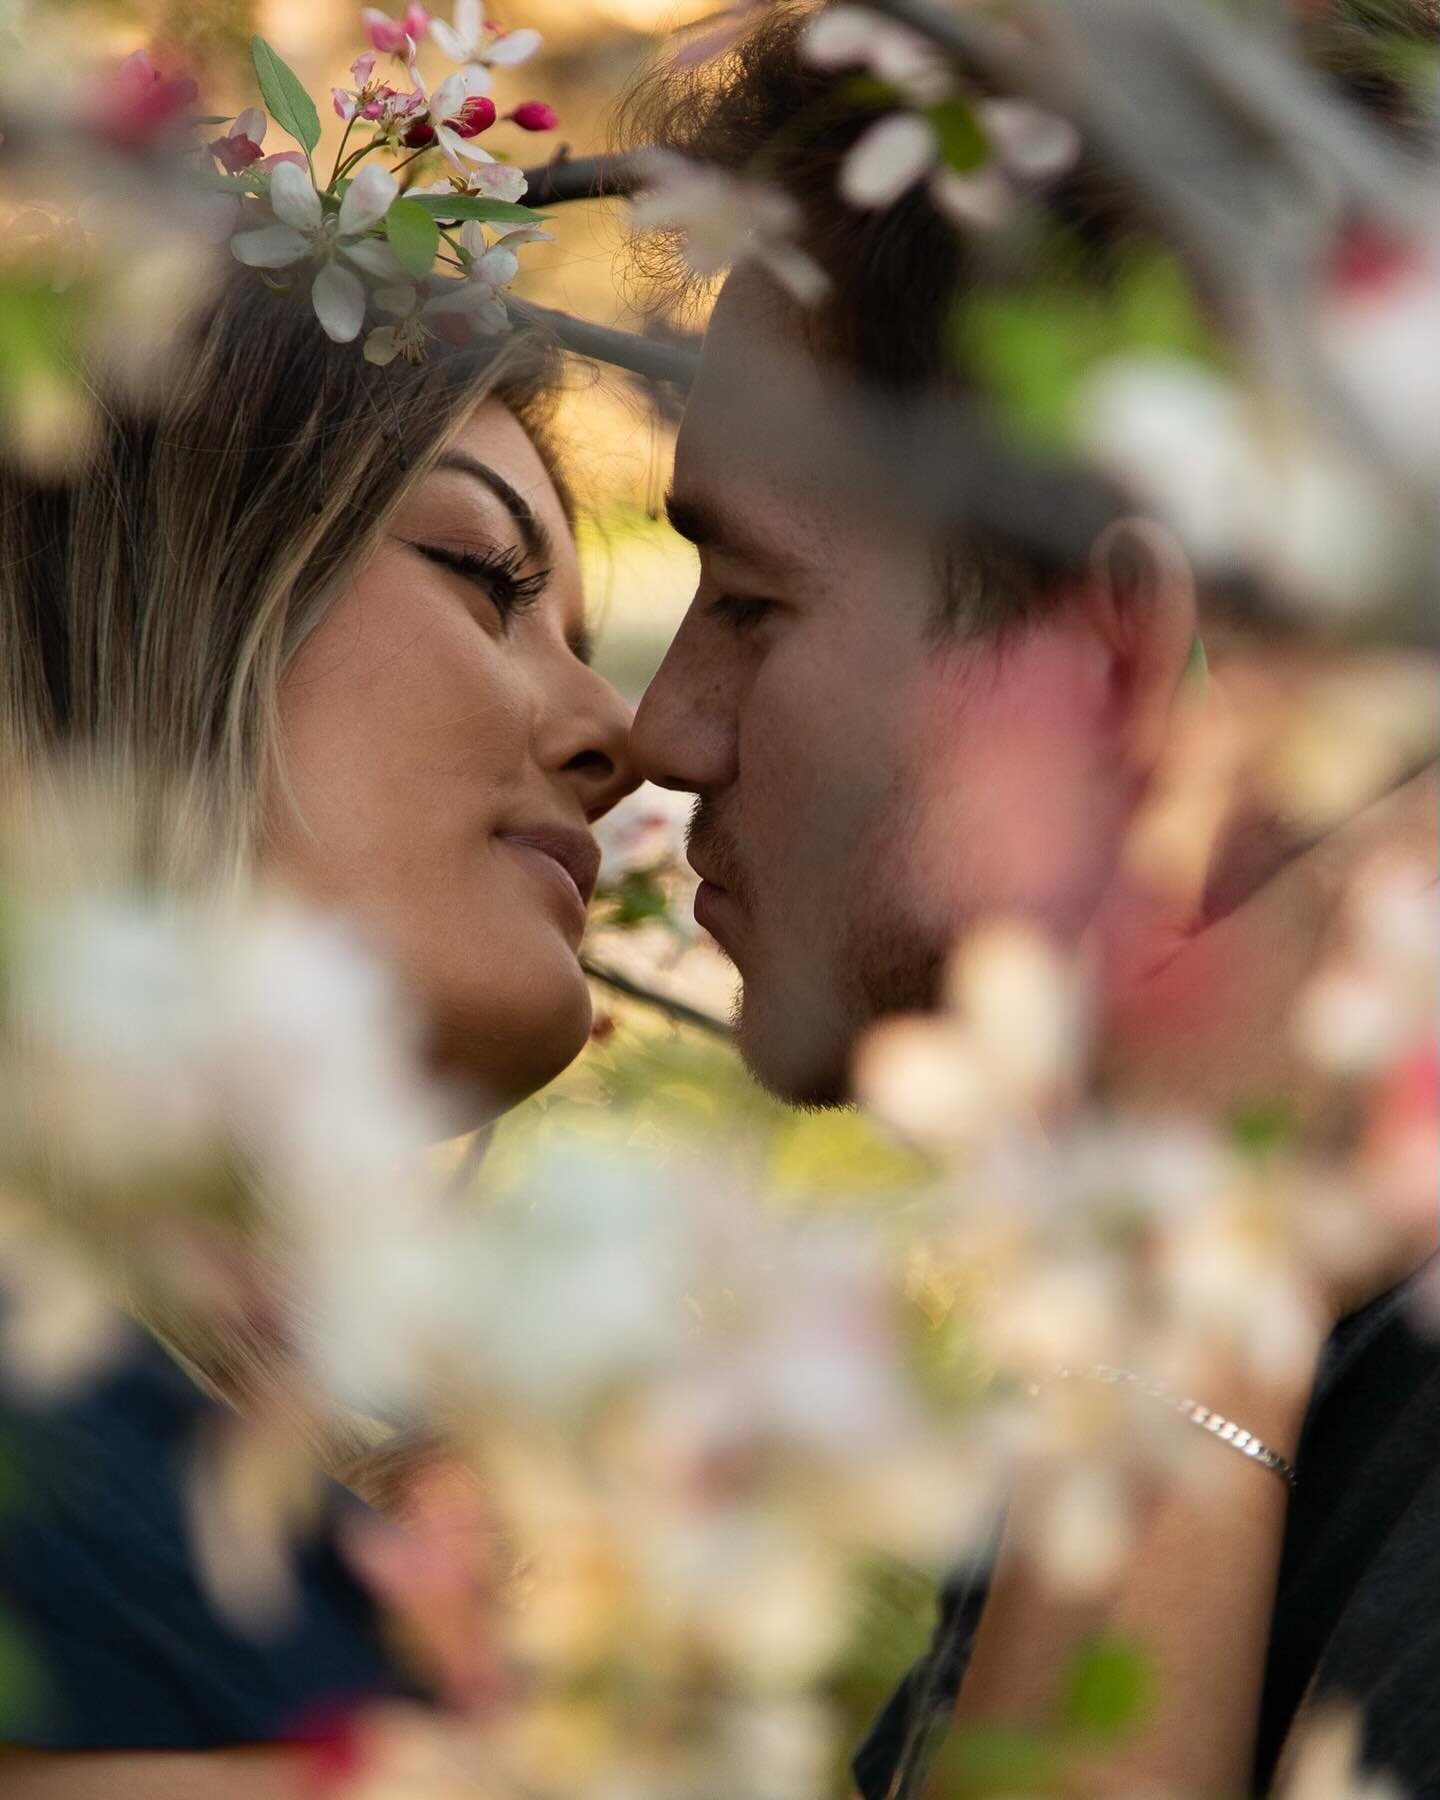 In honor of the first day of spring and my FAVORITE flowers blooming, I had to share photos of a shoot from last spring with the beautiful pink blossoms and such an amazing couple!!! 

#spring #couplesphotography #bayareacouplesphotographer #danville